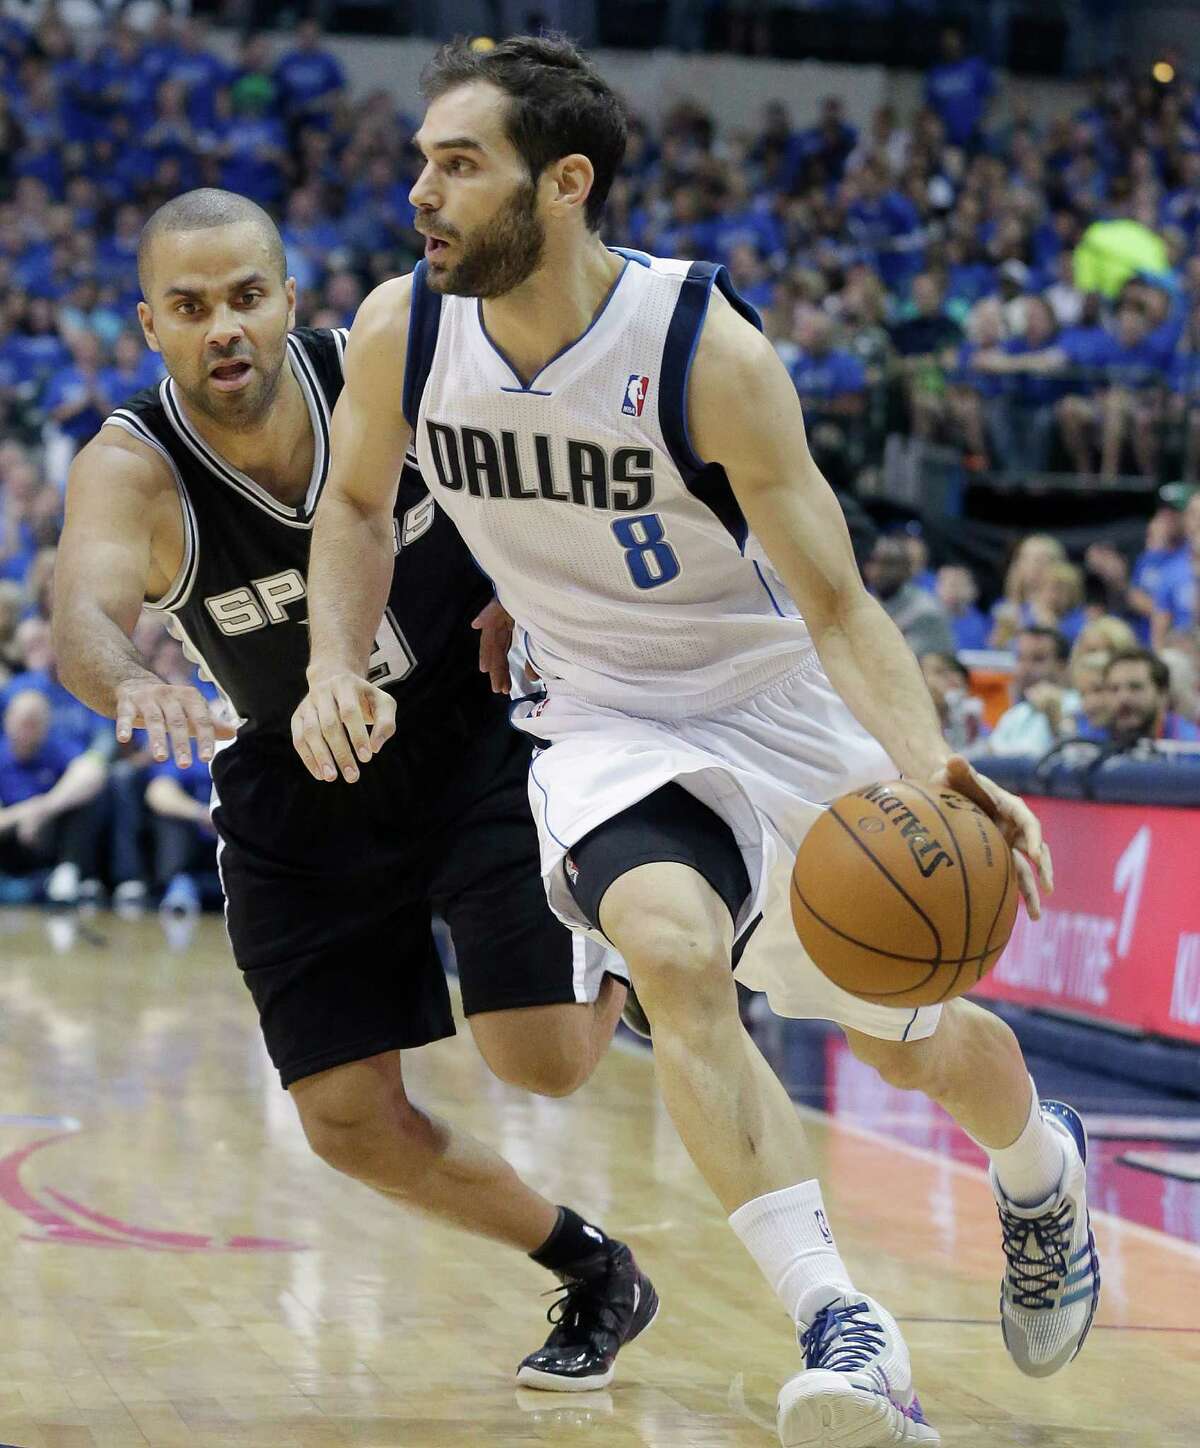 Dallas Mavericks guard Jose Calderon (8) of Spain, drives against San Antonio Spurs guard Tony Parker (9) of France, during the first half in Game 3 in the first round of the NBA basketball playoffs in Dallas, Saturday, April 26, 2014. (AP Photo/LM Otero)